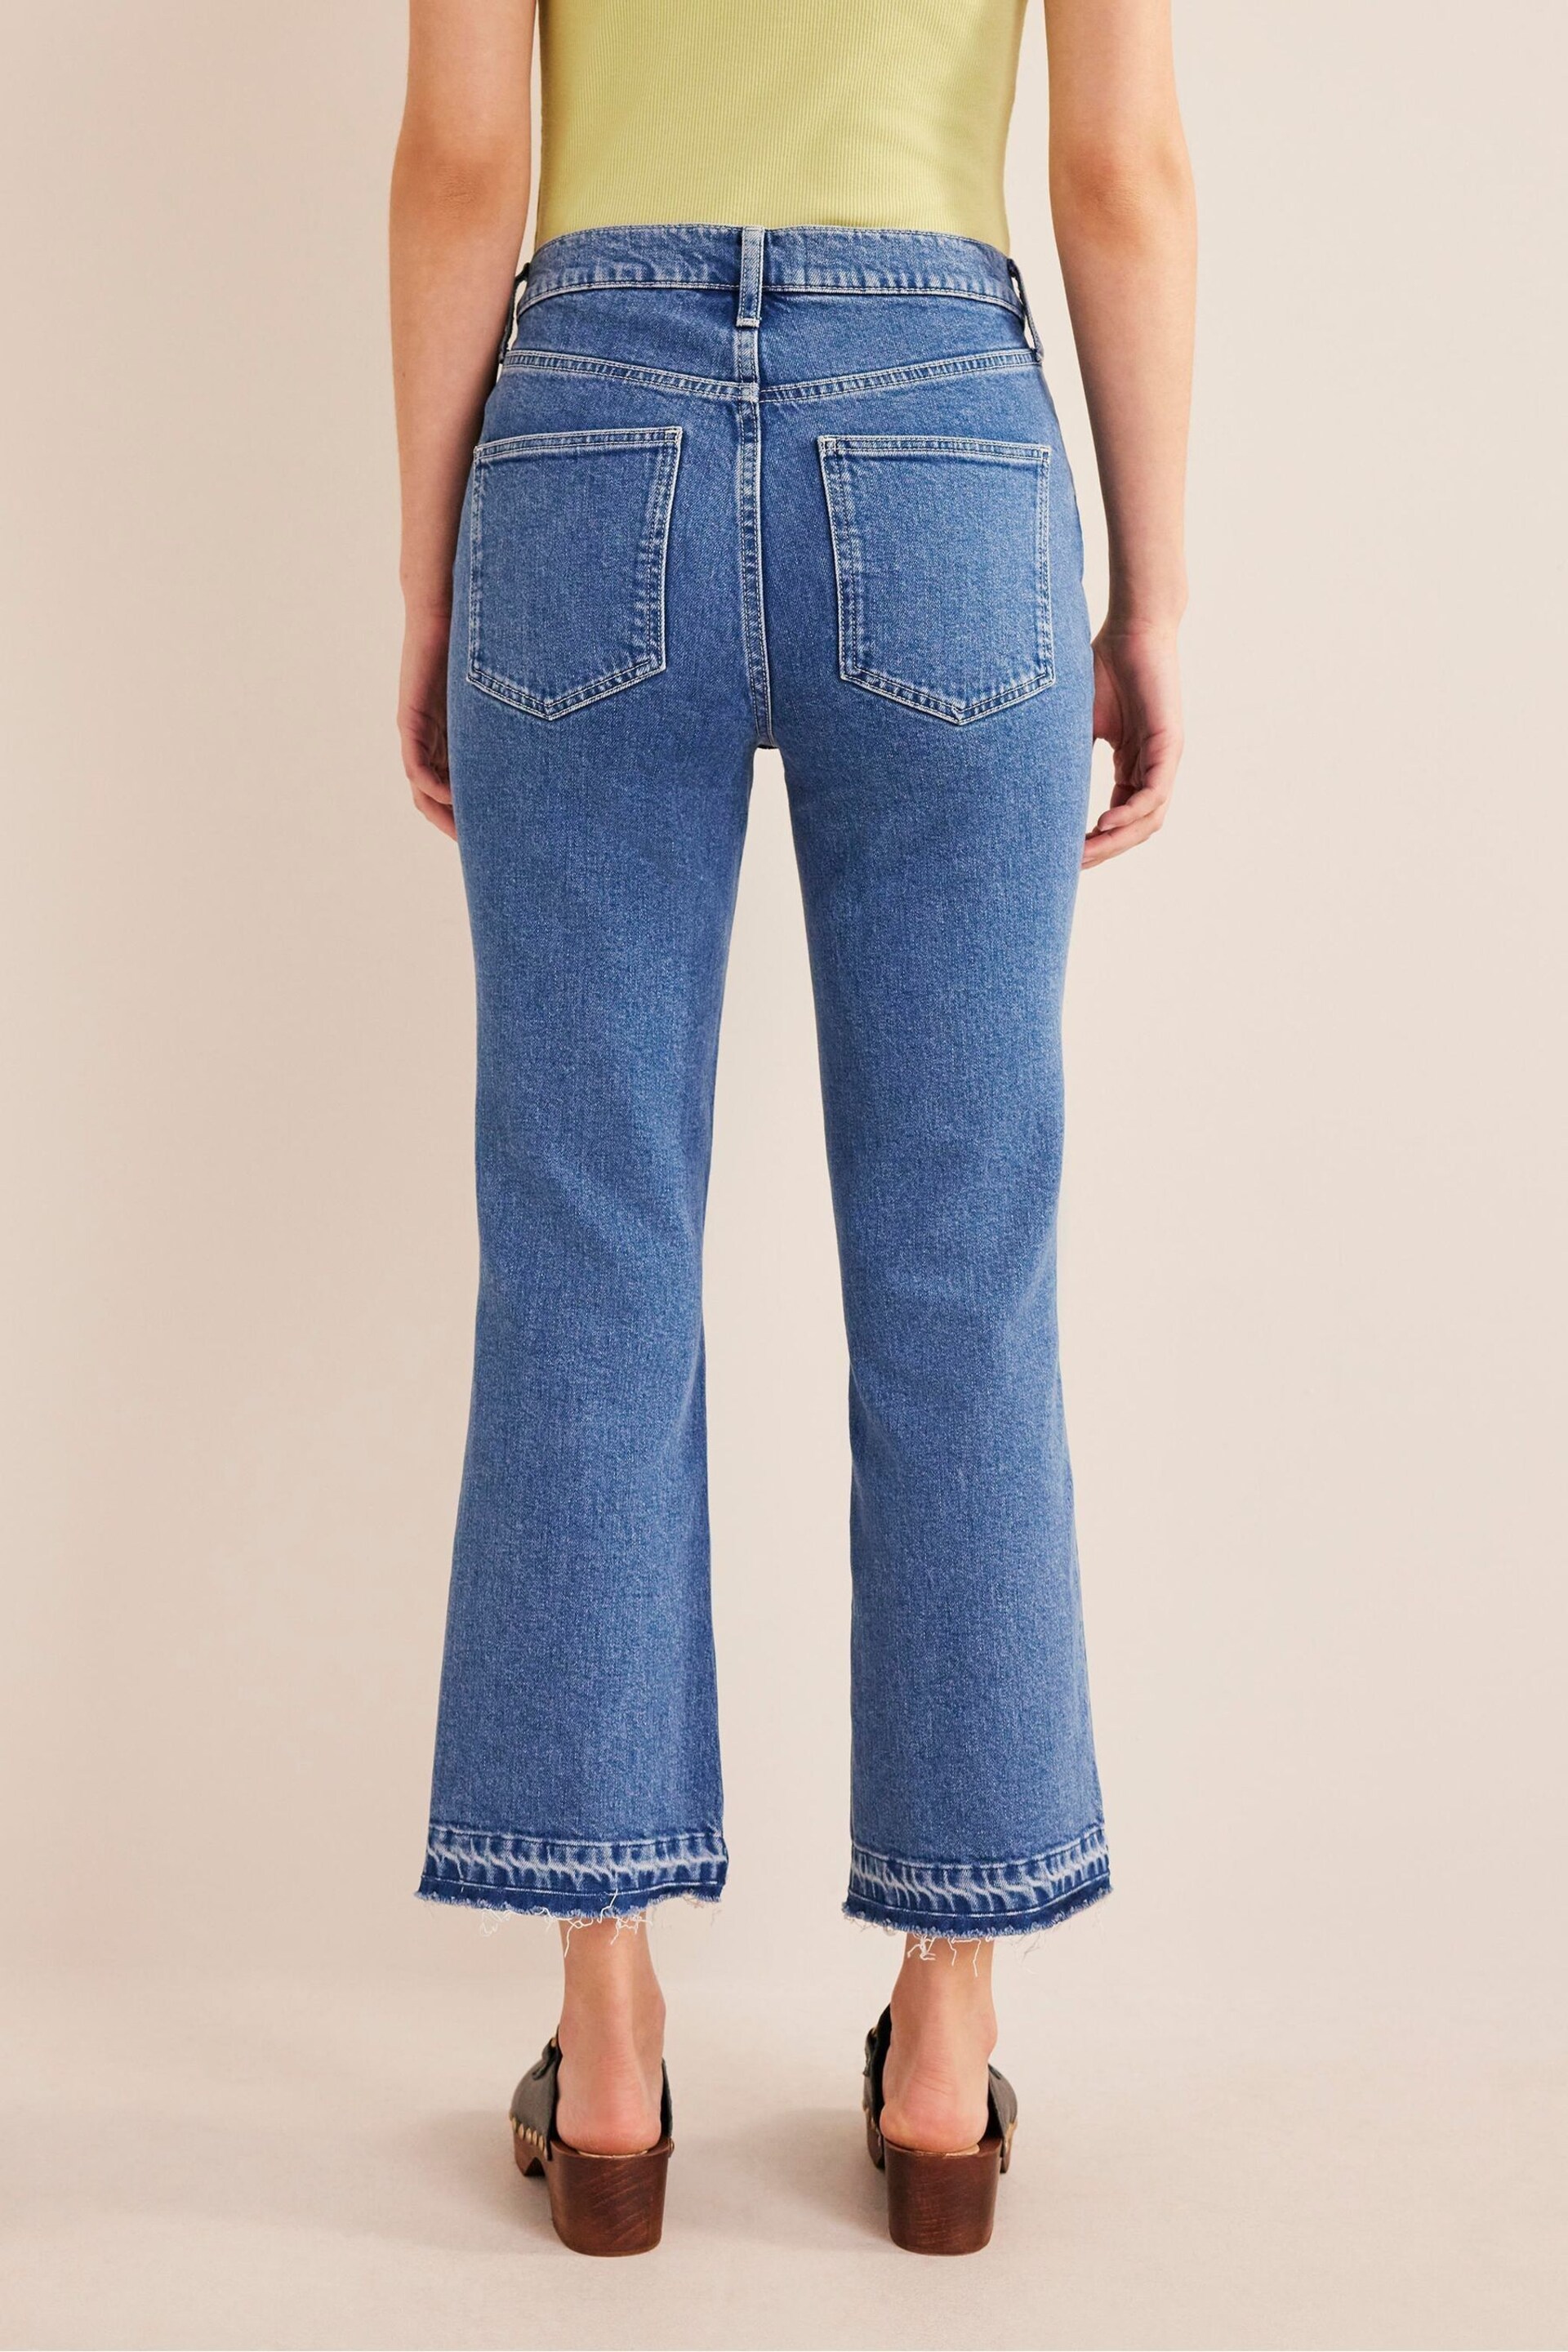 Boden Blue Baby Mid Rise Kick Jeans - Image 2 of 6